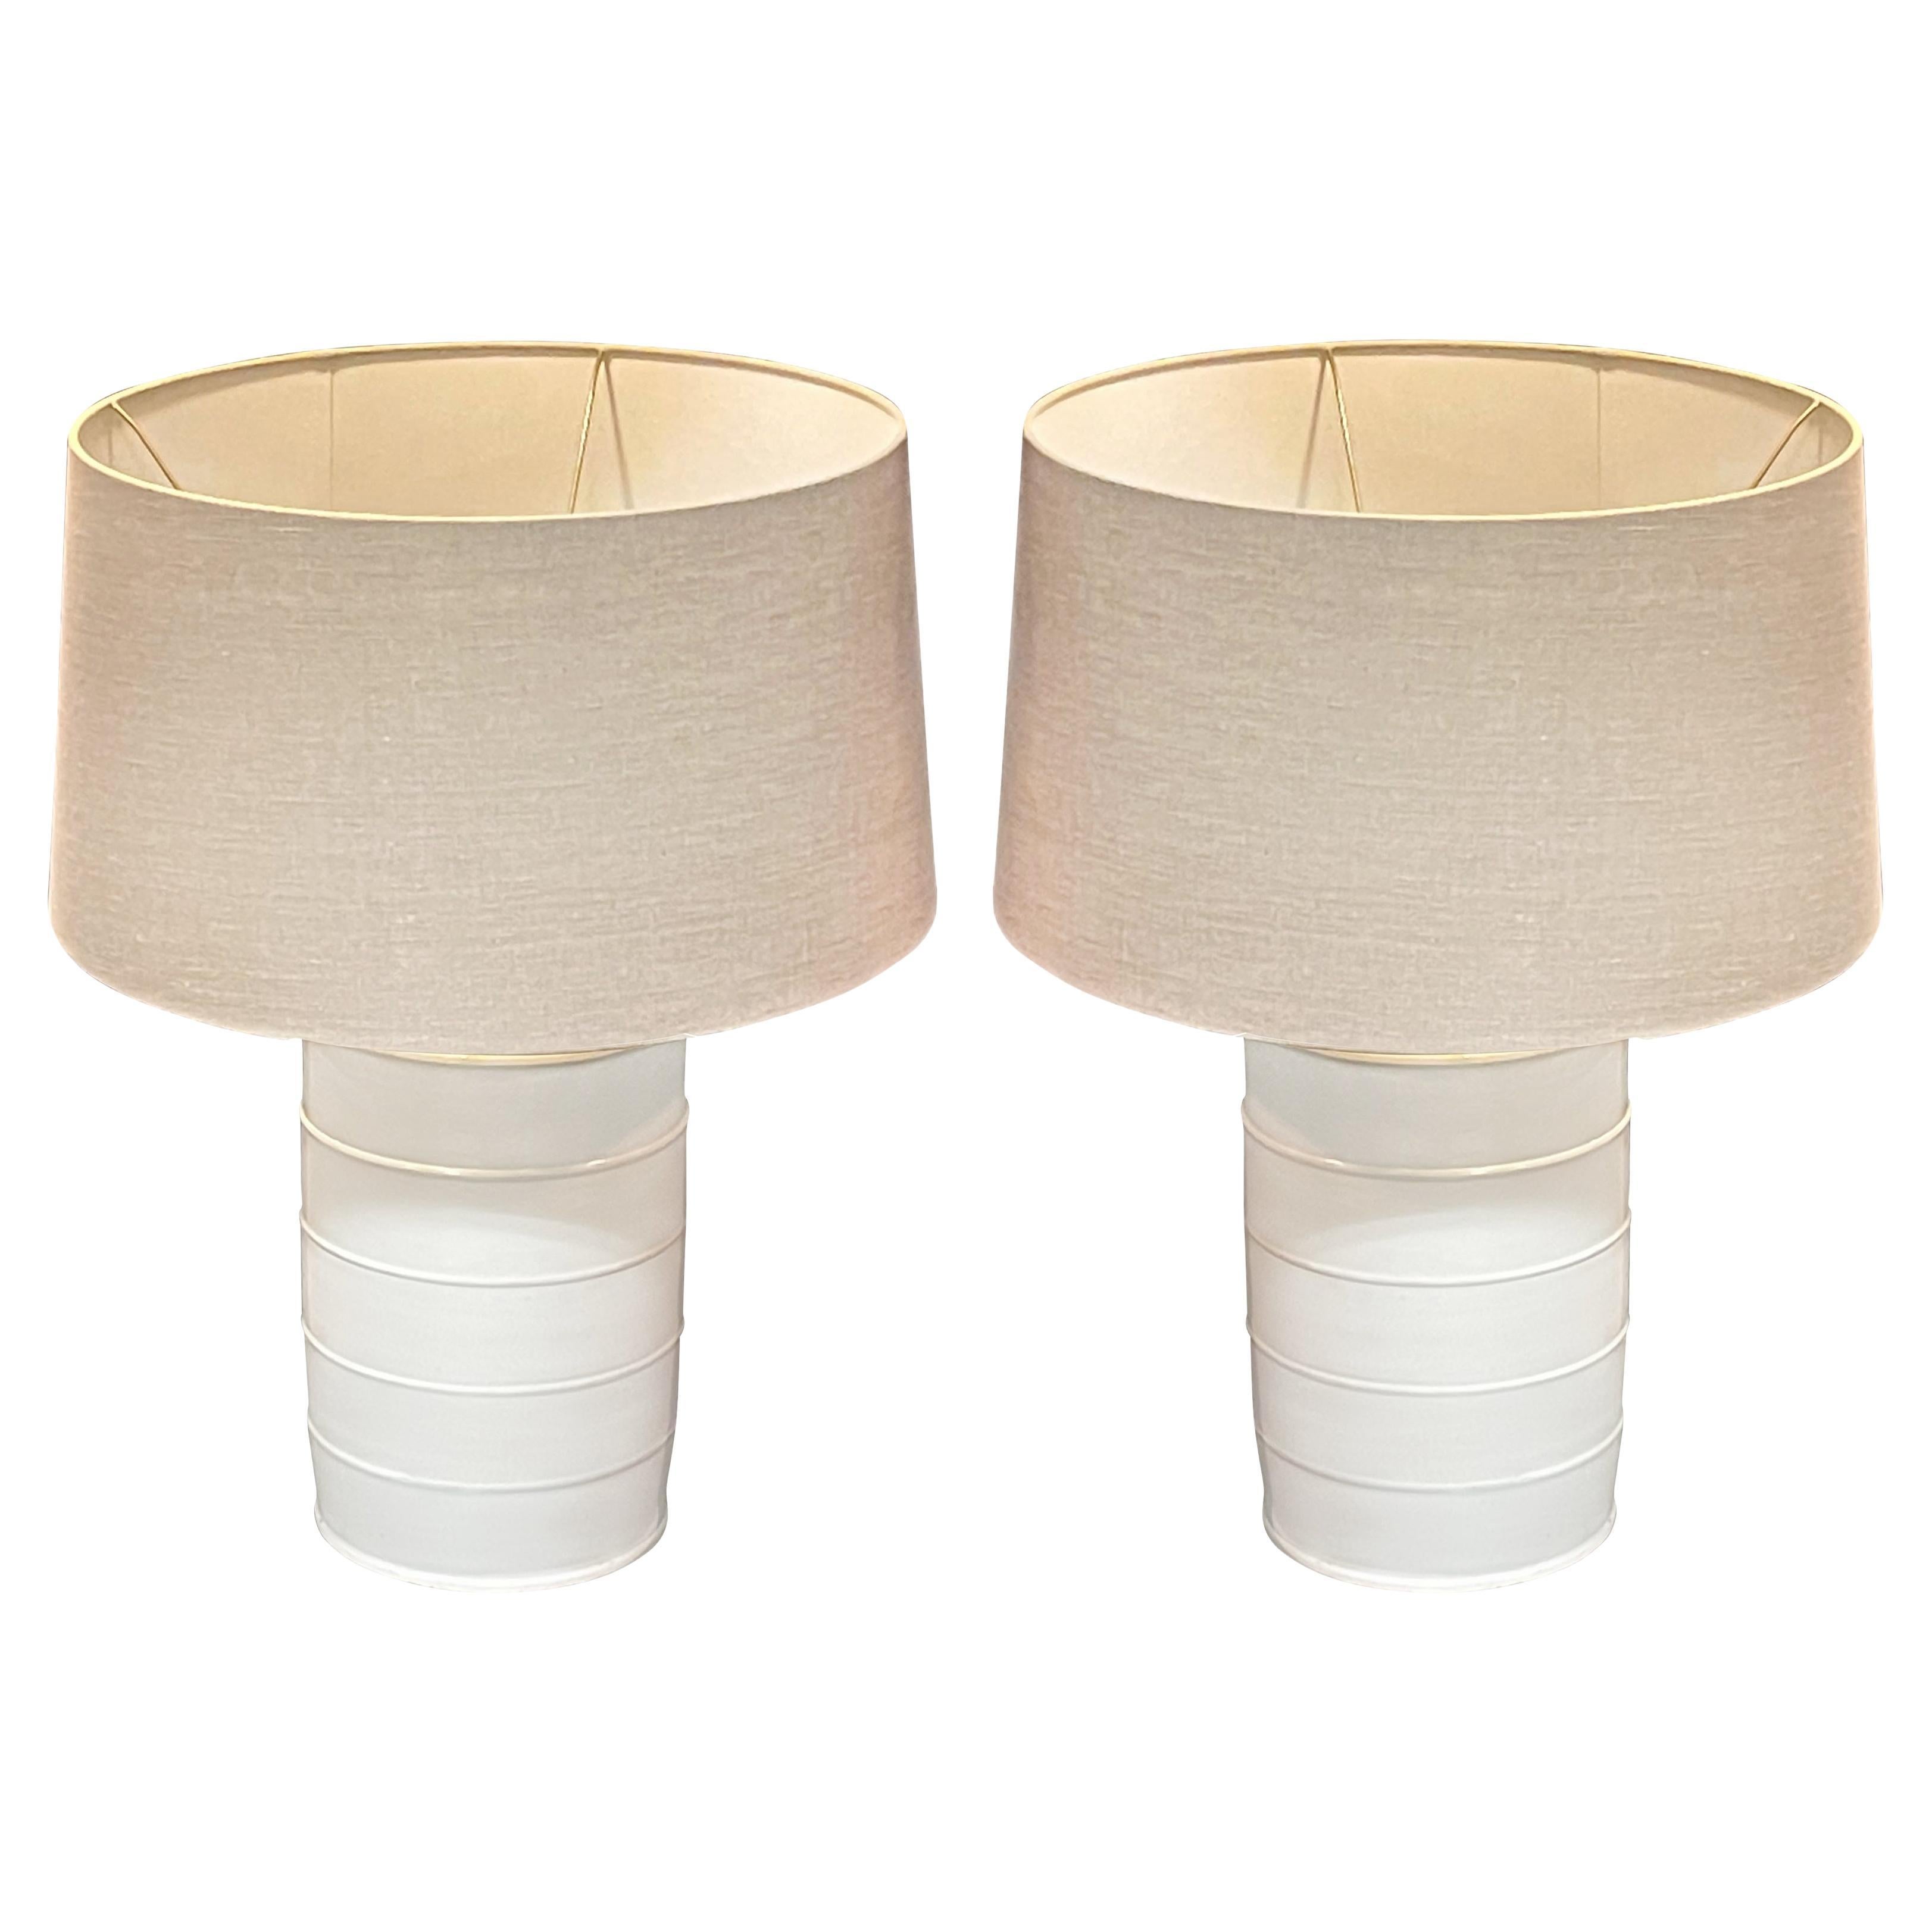 Cream Four Band Design Pair Canister Lamps, China, Contemporary For Sale